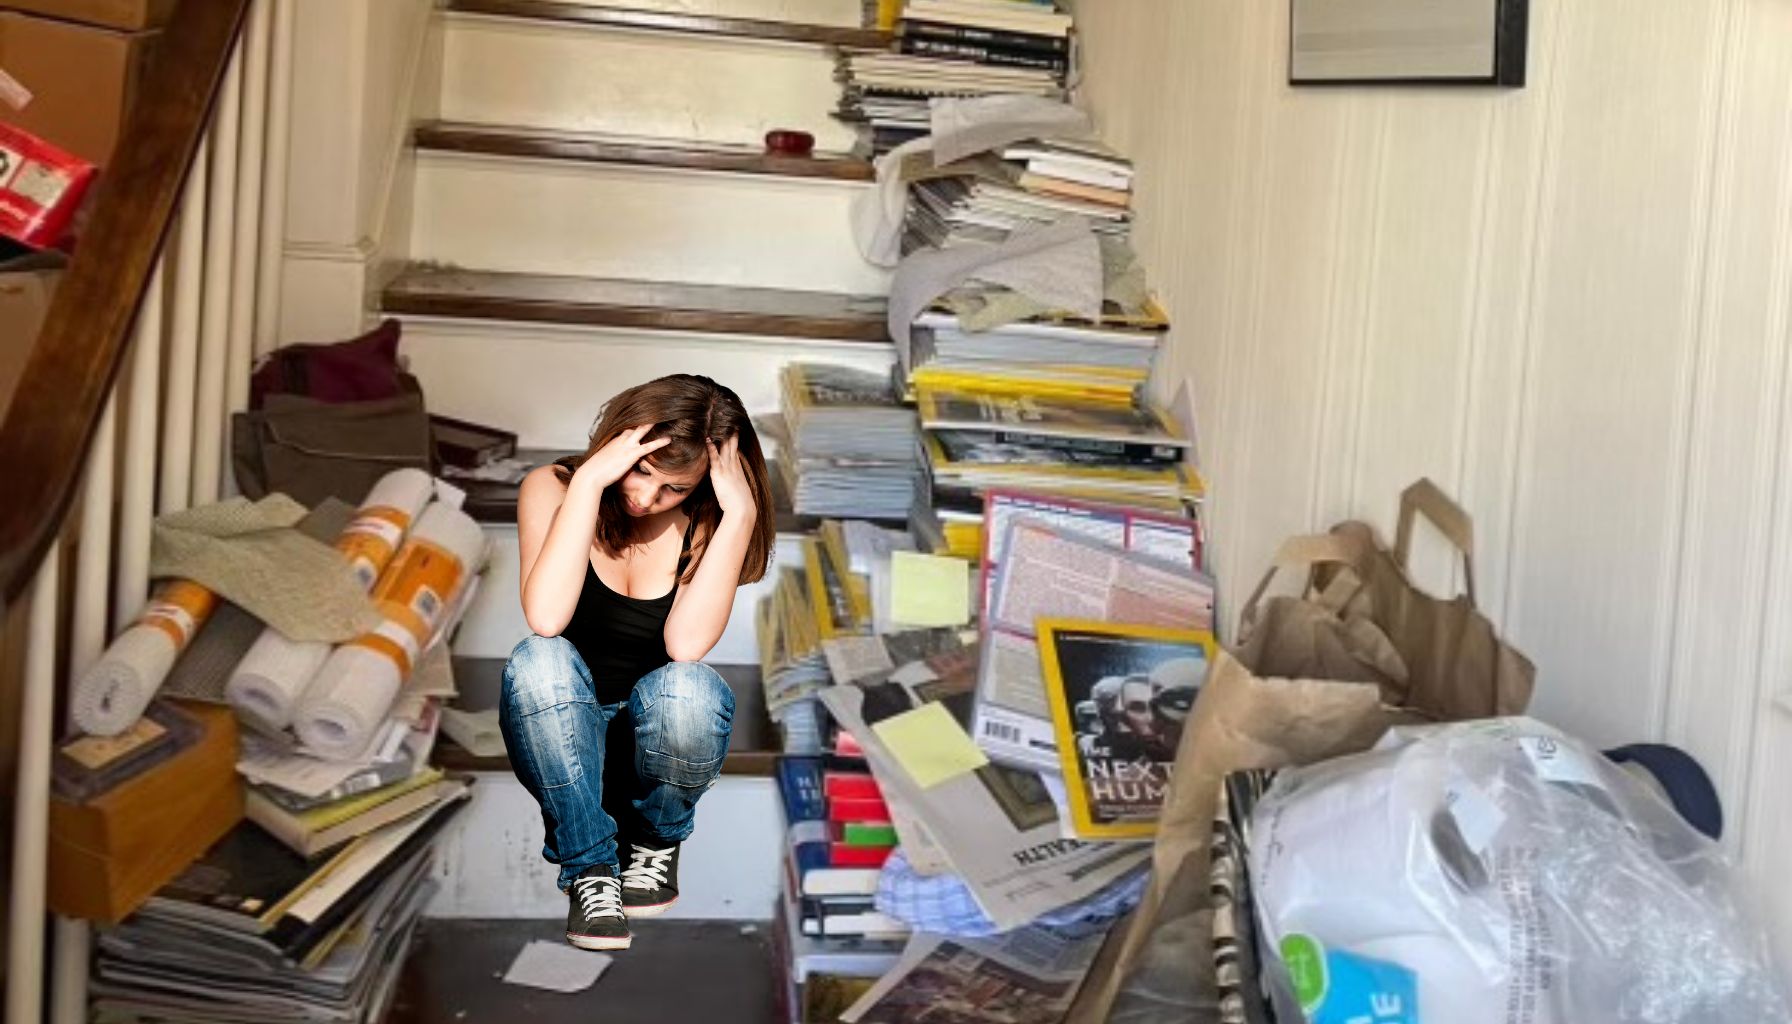 A person sits on the stairs holding their head in their hands, surrounded by clutter including rolls of paper, books, bags, and tools for water damage restoration. -PureOneServices